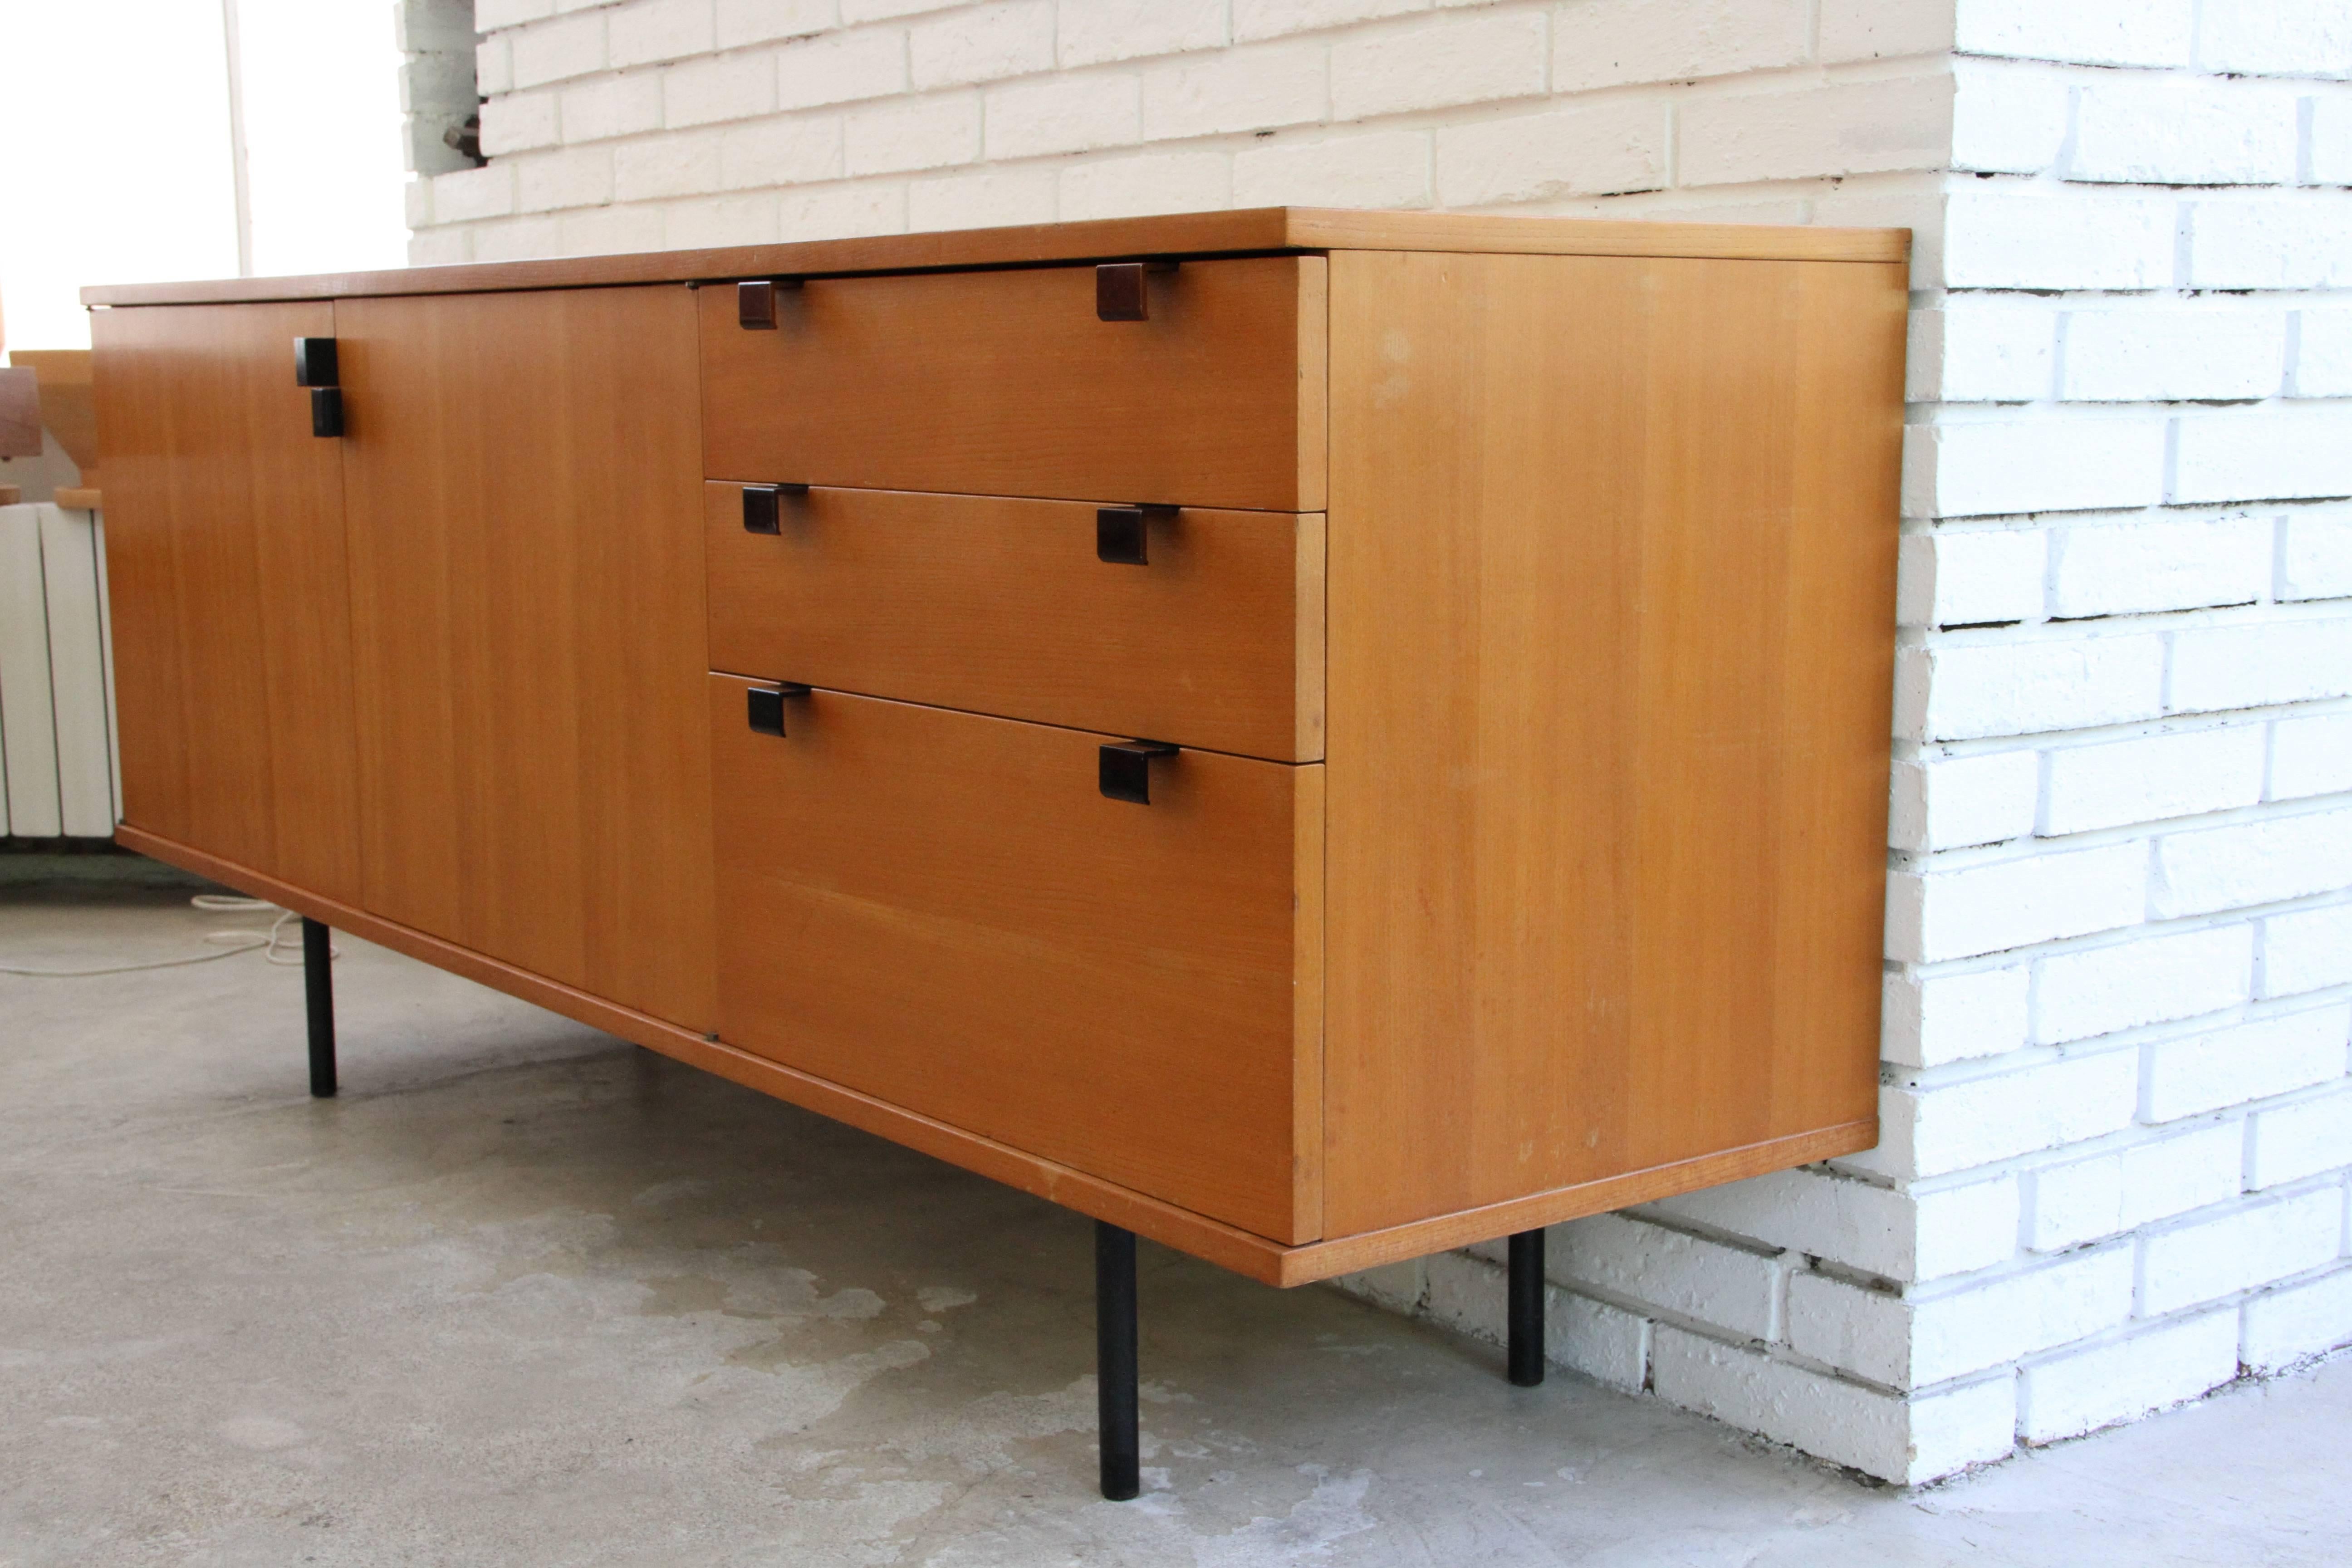 This credenza was designed by Alain Richard in 1954,
made by Meubles TV in ash tree, feet and handles are in métal
nice patina, original conditions with some signs of age.